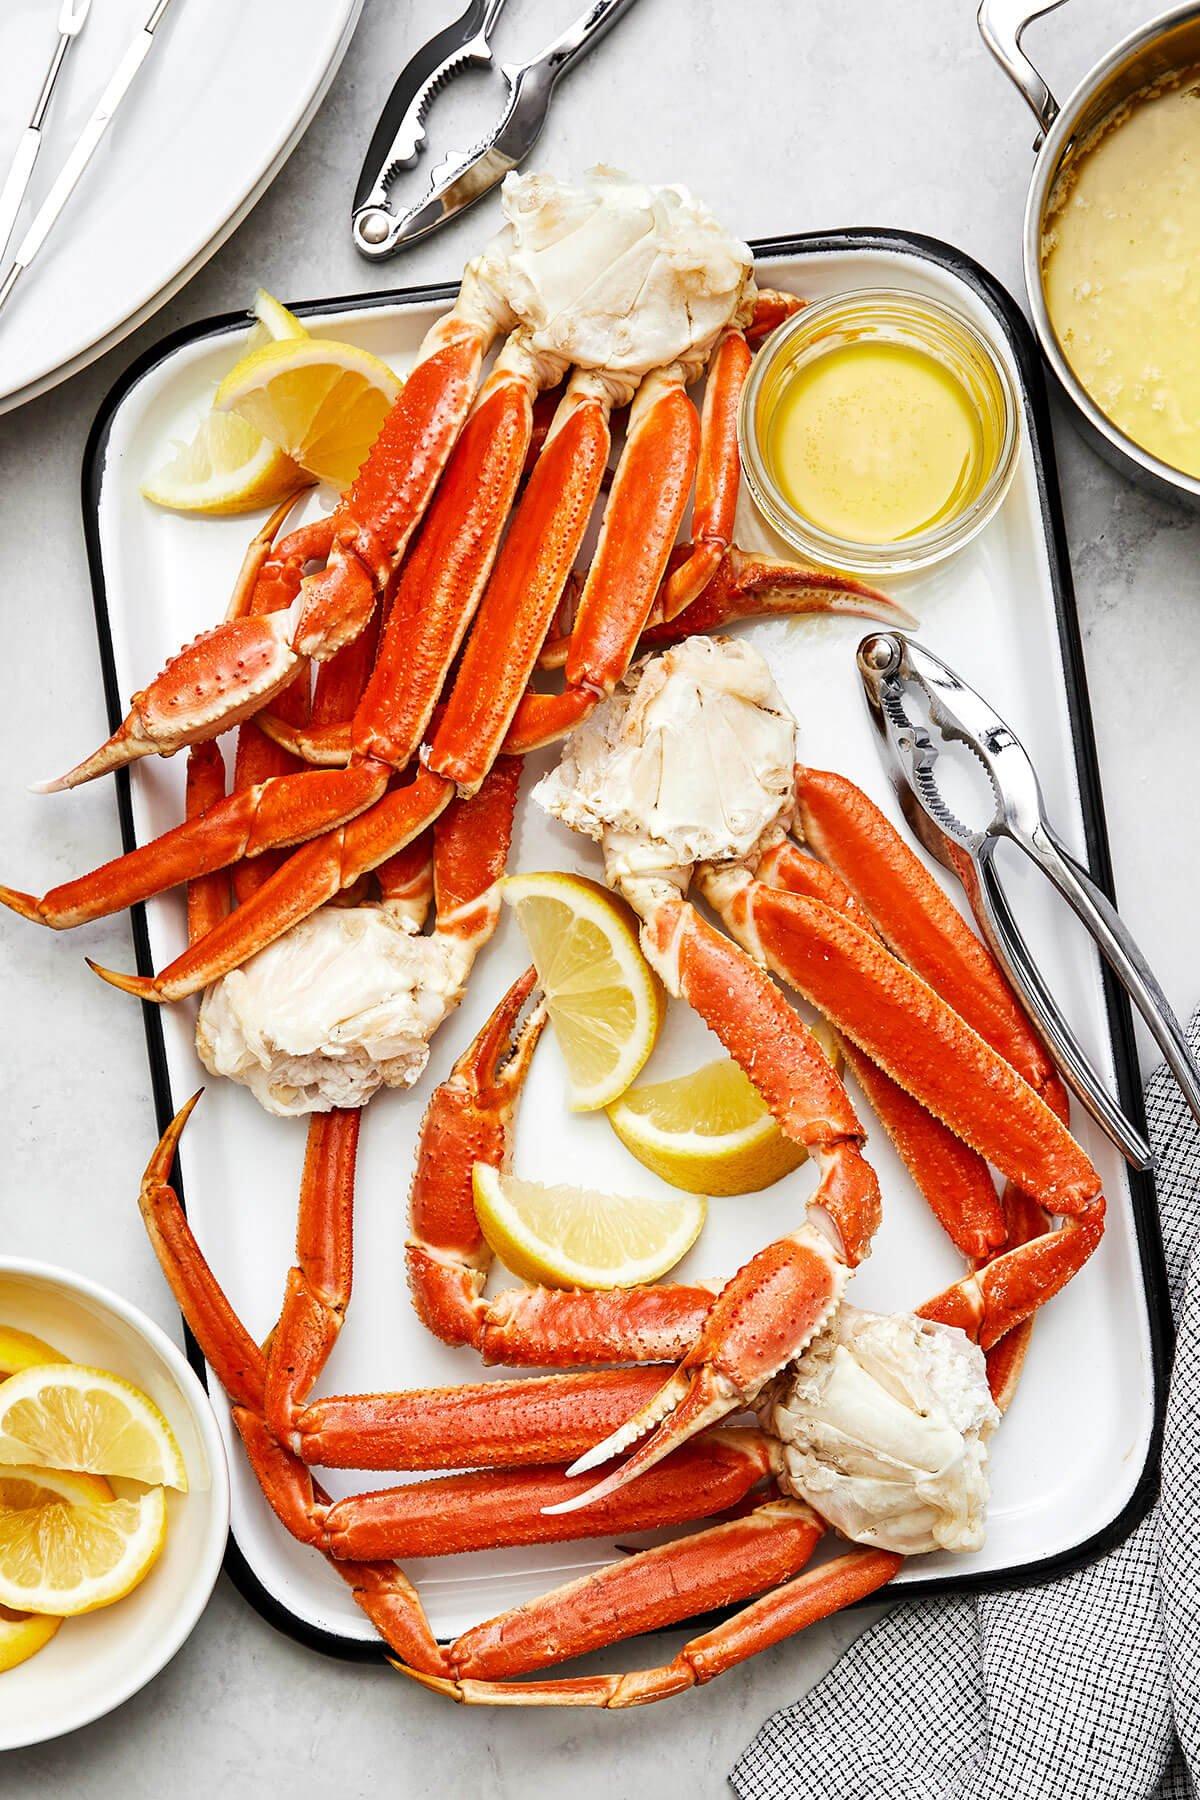 Cooked crab legs on a tray